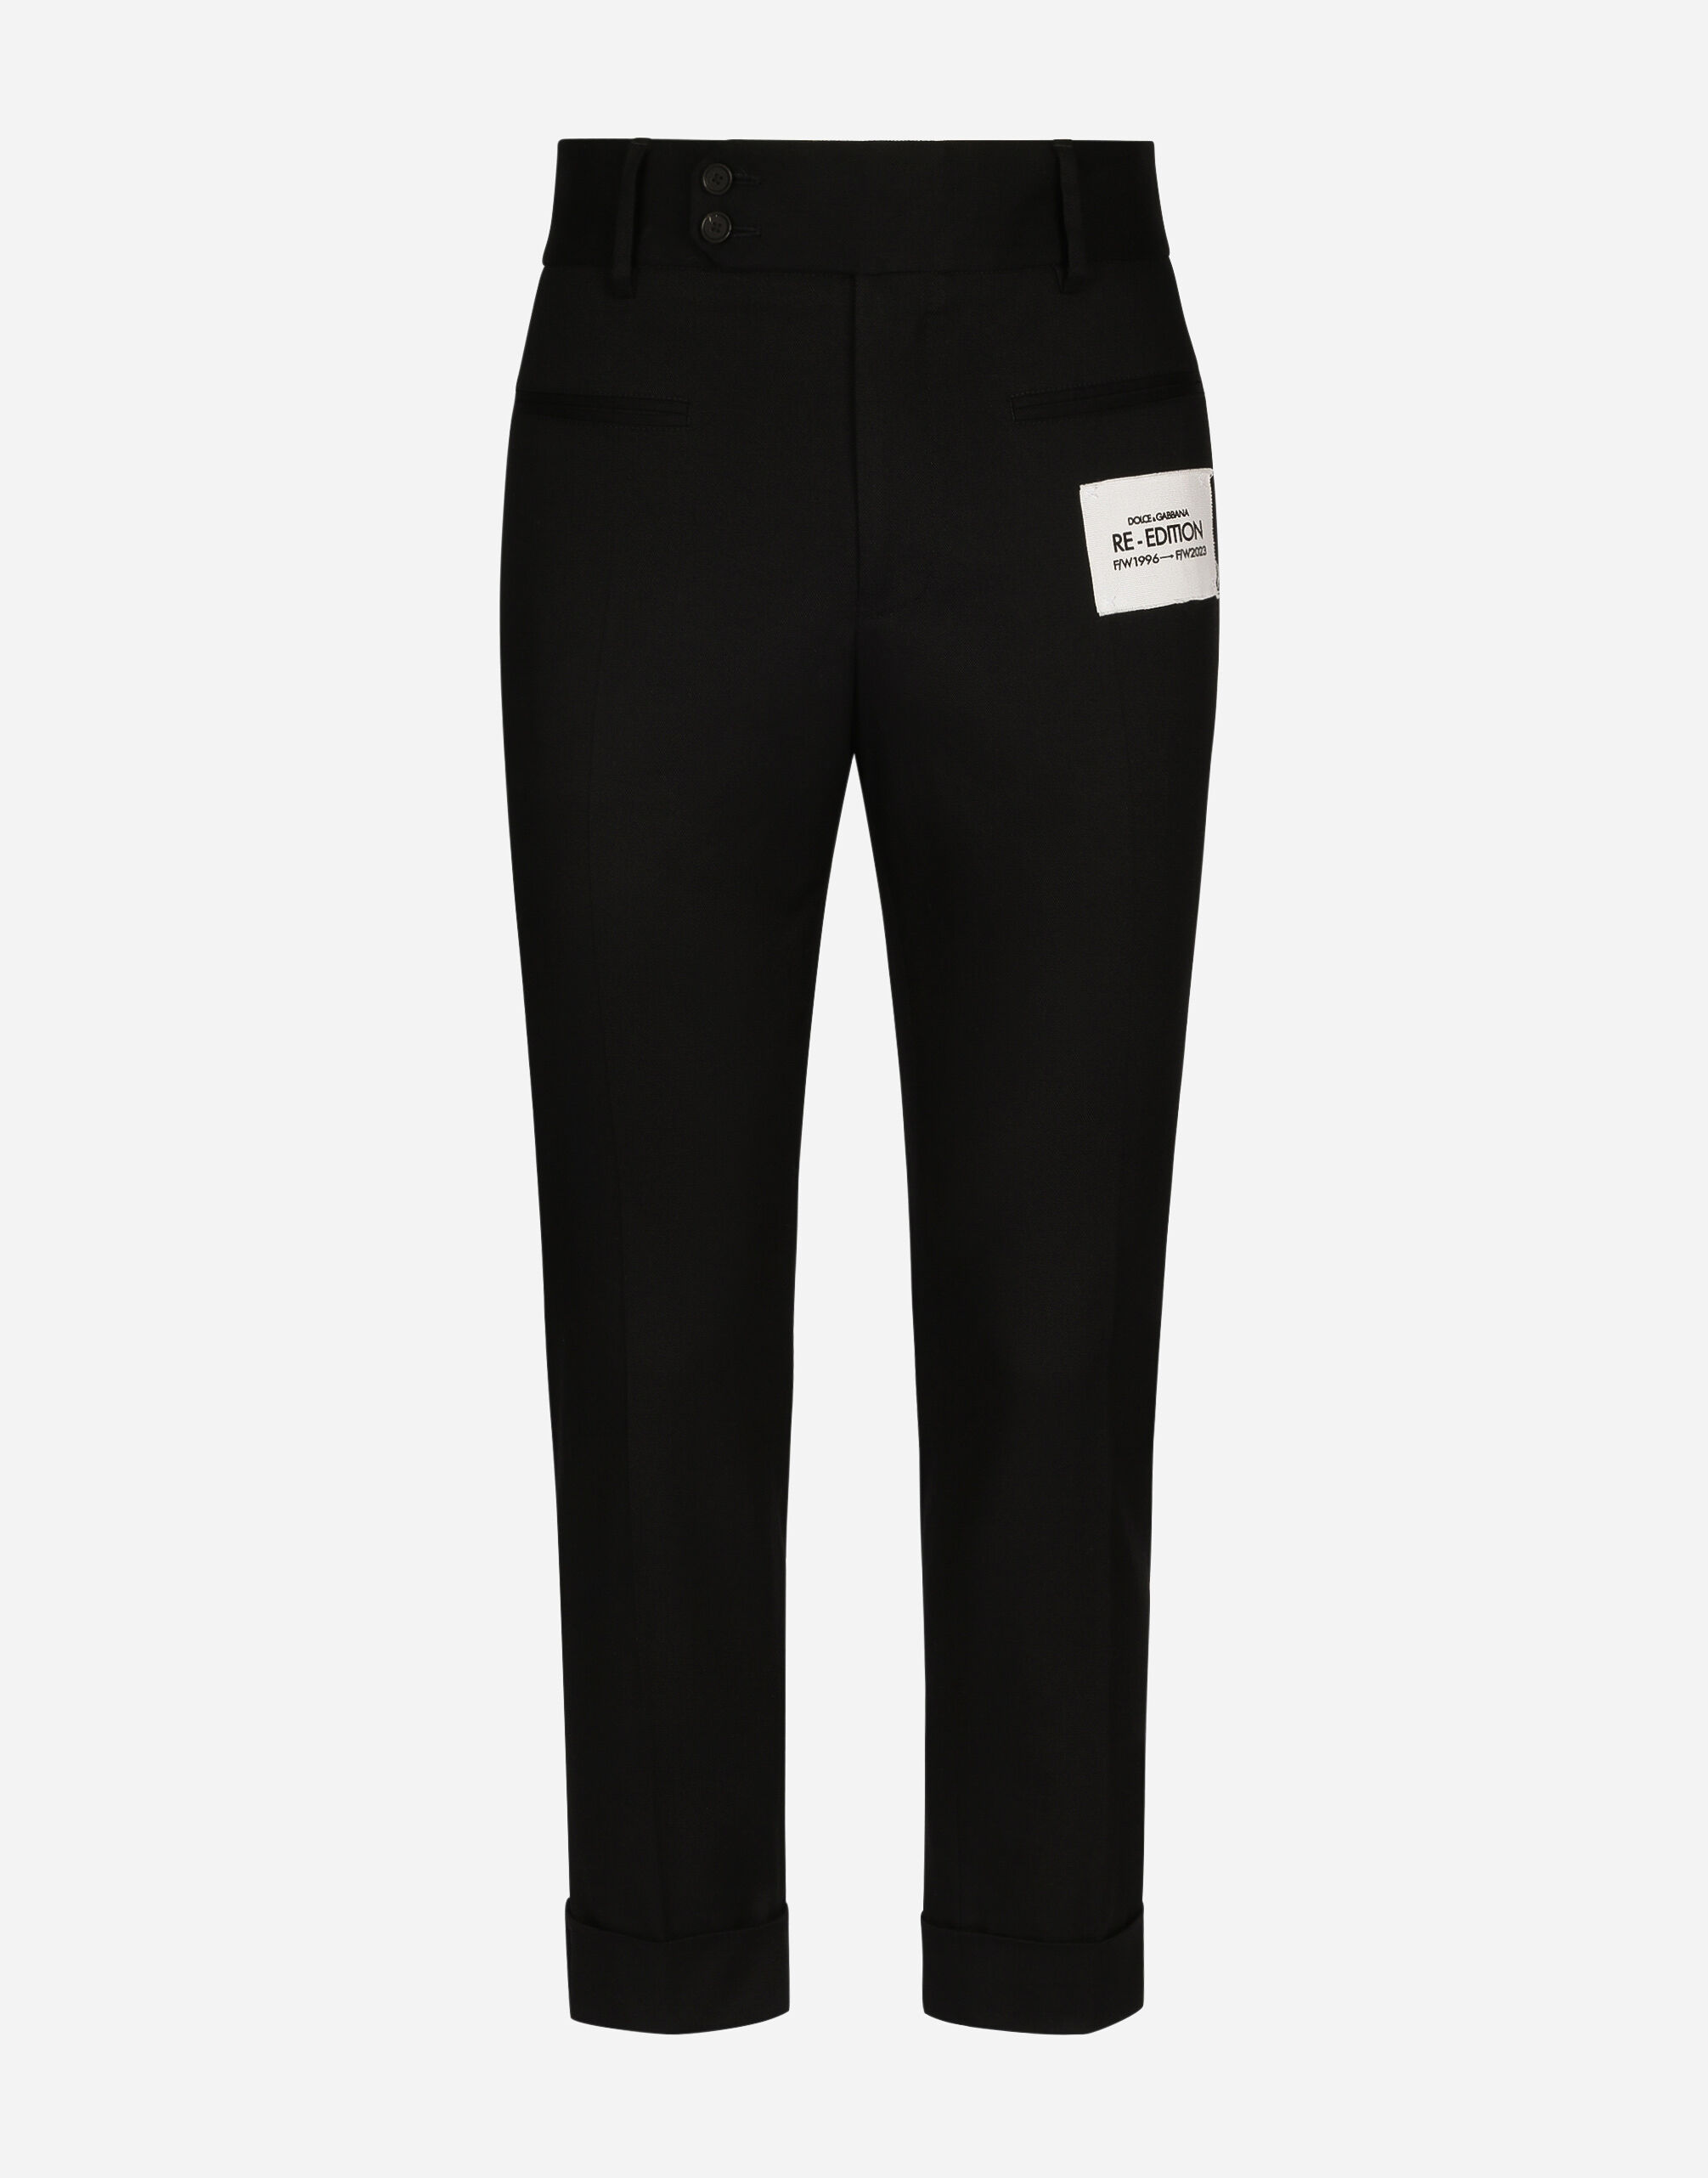 Dolce & Gabbana Stretch drill pants with Re-Edition label Black VG446FVP187